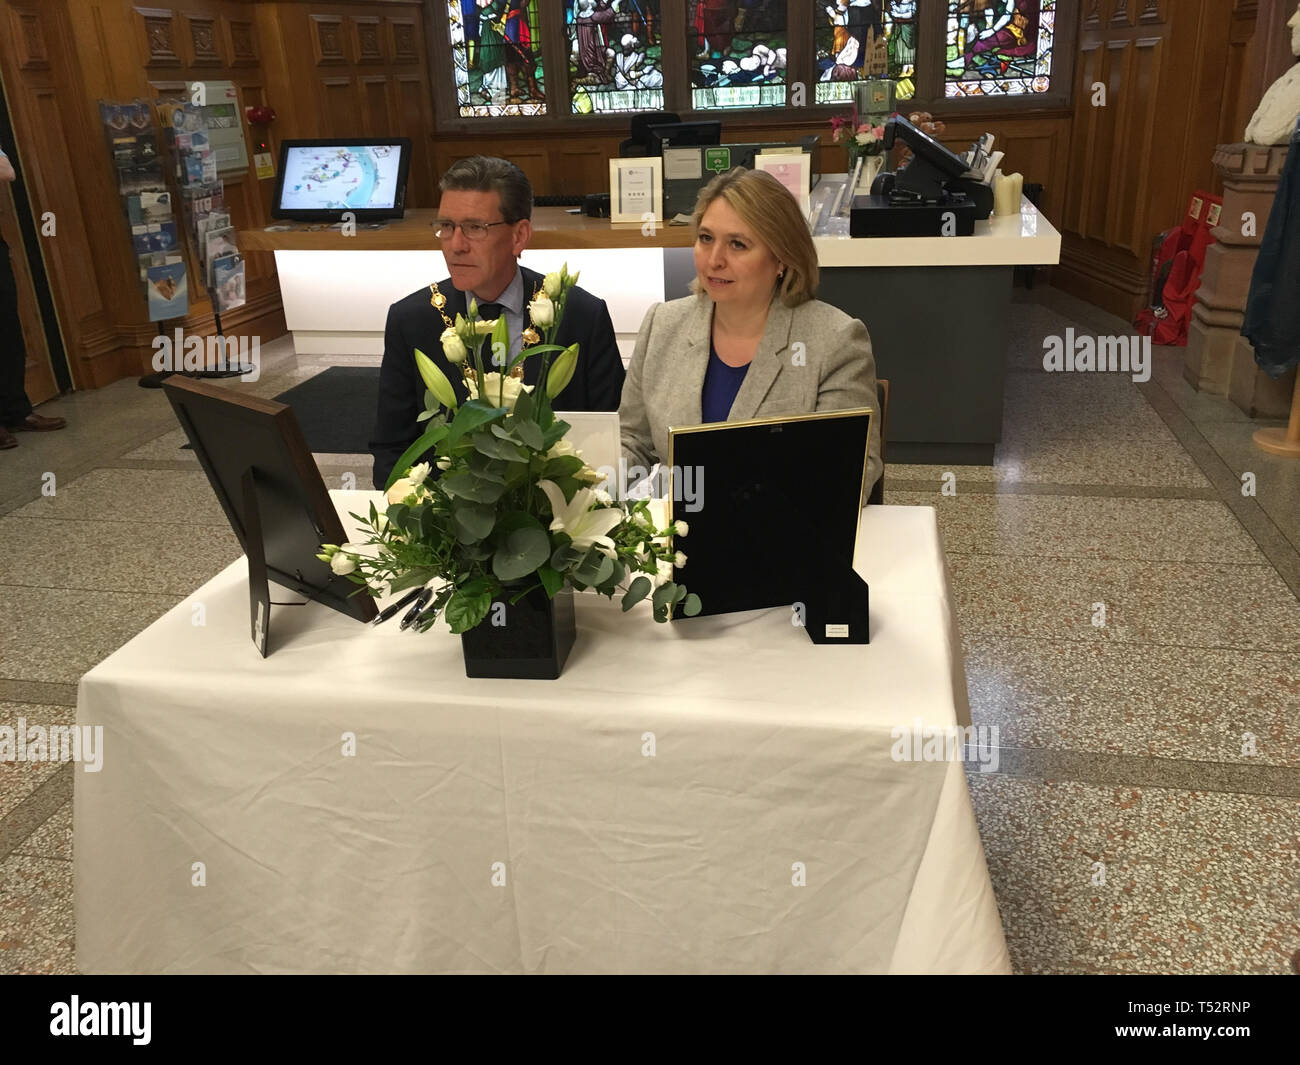 Lord Mayor of Londonderry John Boyle and Secretary of State for Northern Ireland Karen Bradley in the Guildhall in Londonderry. Mrs Bradley was one of the first to sign a book of condolence in honour of murdered journalist Lyra McKee inside the Guildhall on Saturday morning. Stock Photo